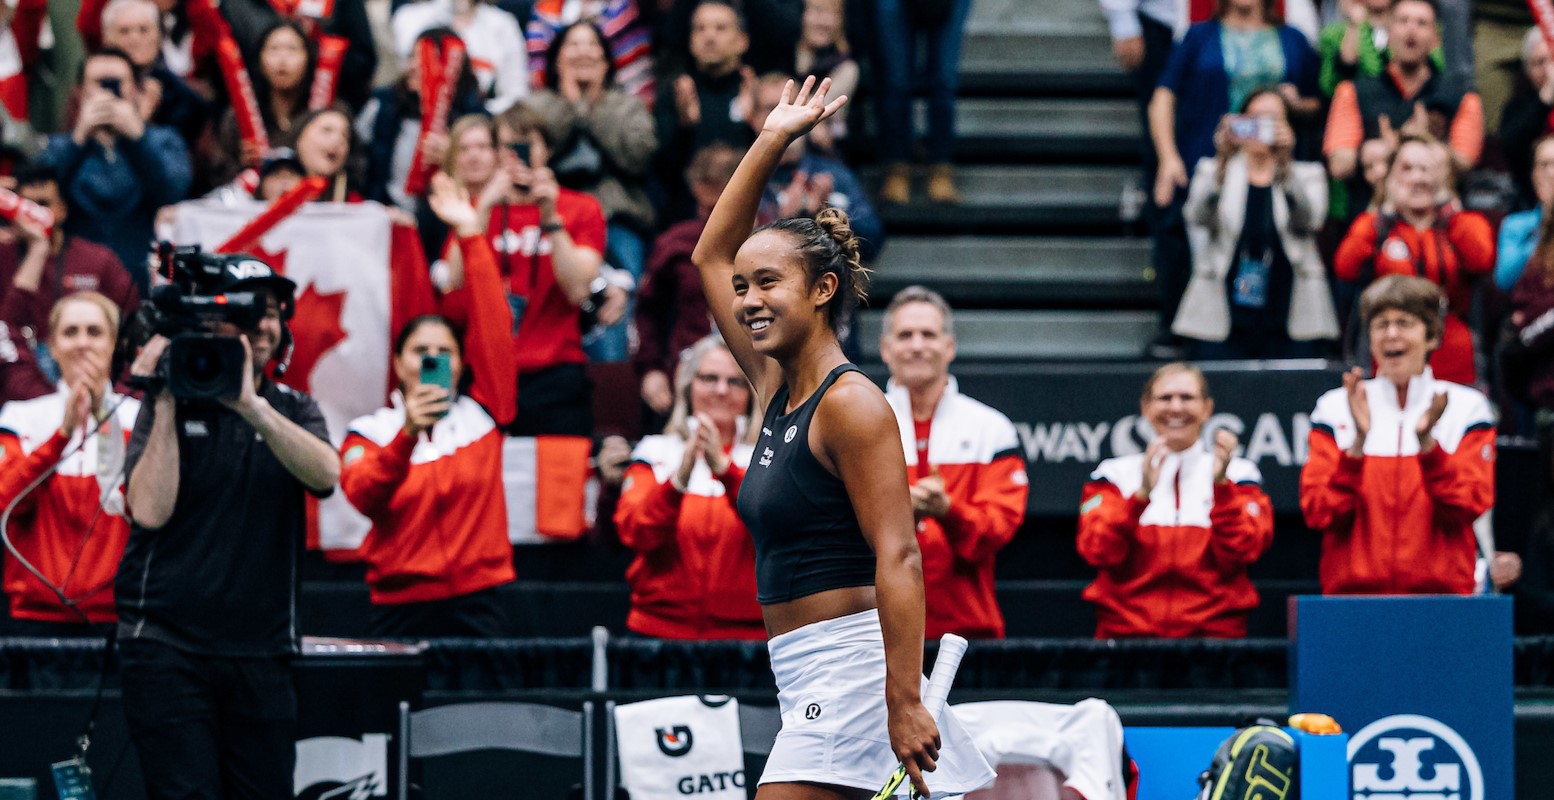 Leylah Fernandez waves to the crowd as Team Canada celebrates behind her.